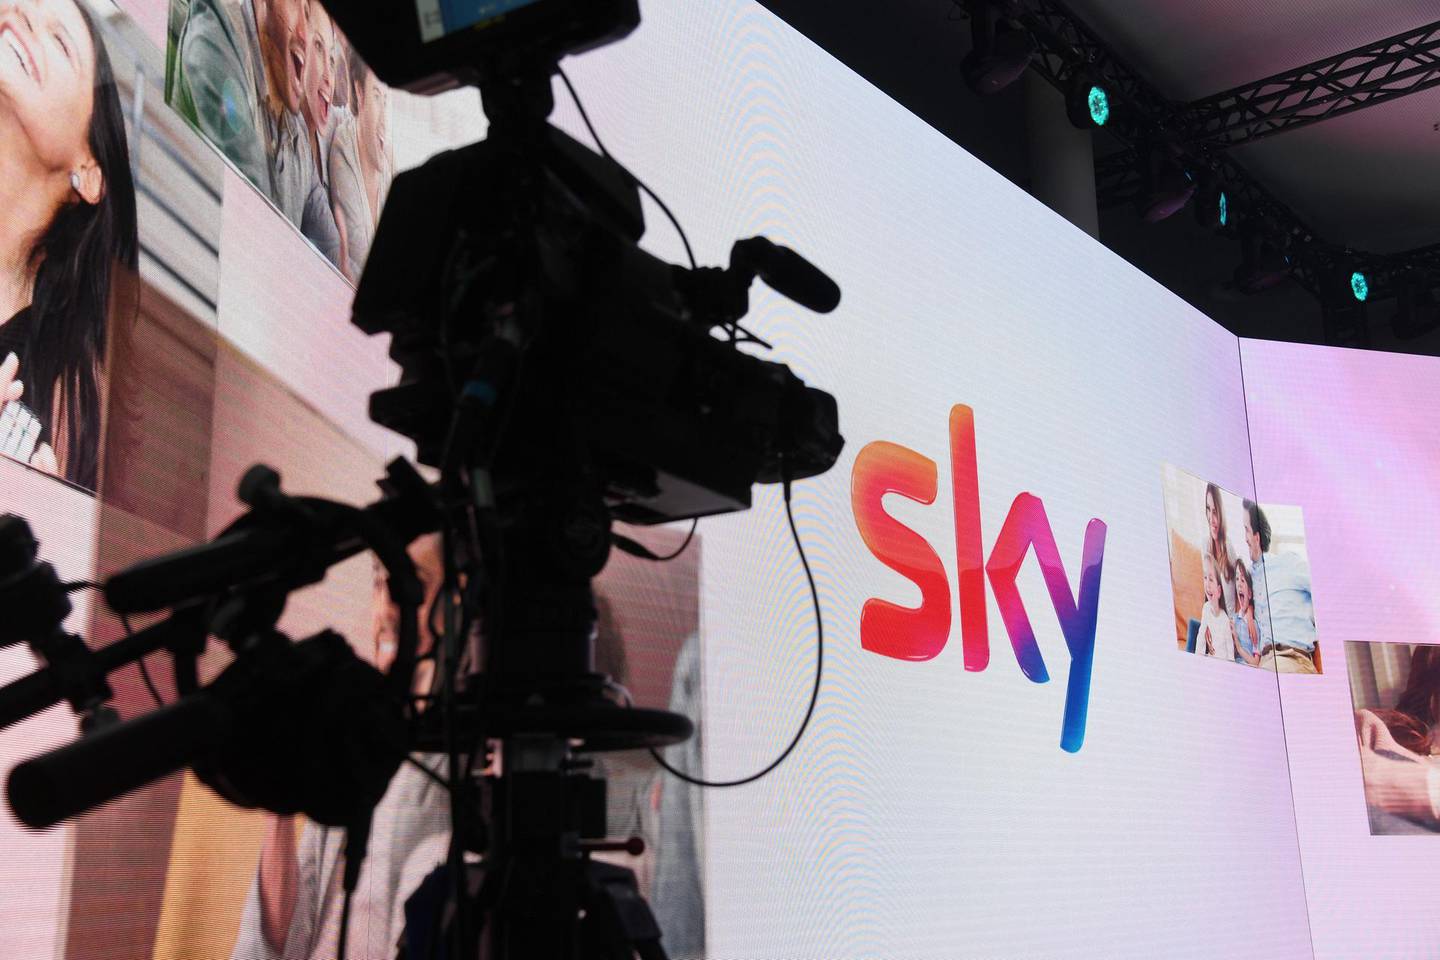 17 April 2018, UnterfÃ¶hring bei Munich, Germany: A Video Camera and the Logo Sky, taken at the introduction of "The New Sky" at the pay TV Sky. Photo: Tobias Hase/dpa (Photo by Tobias Hase/picture alliance via Getty Images)